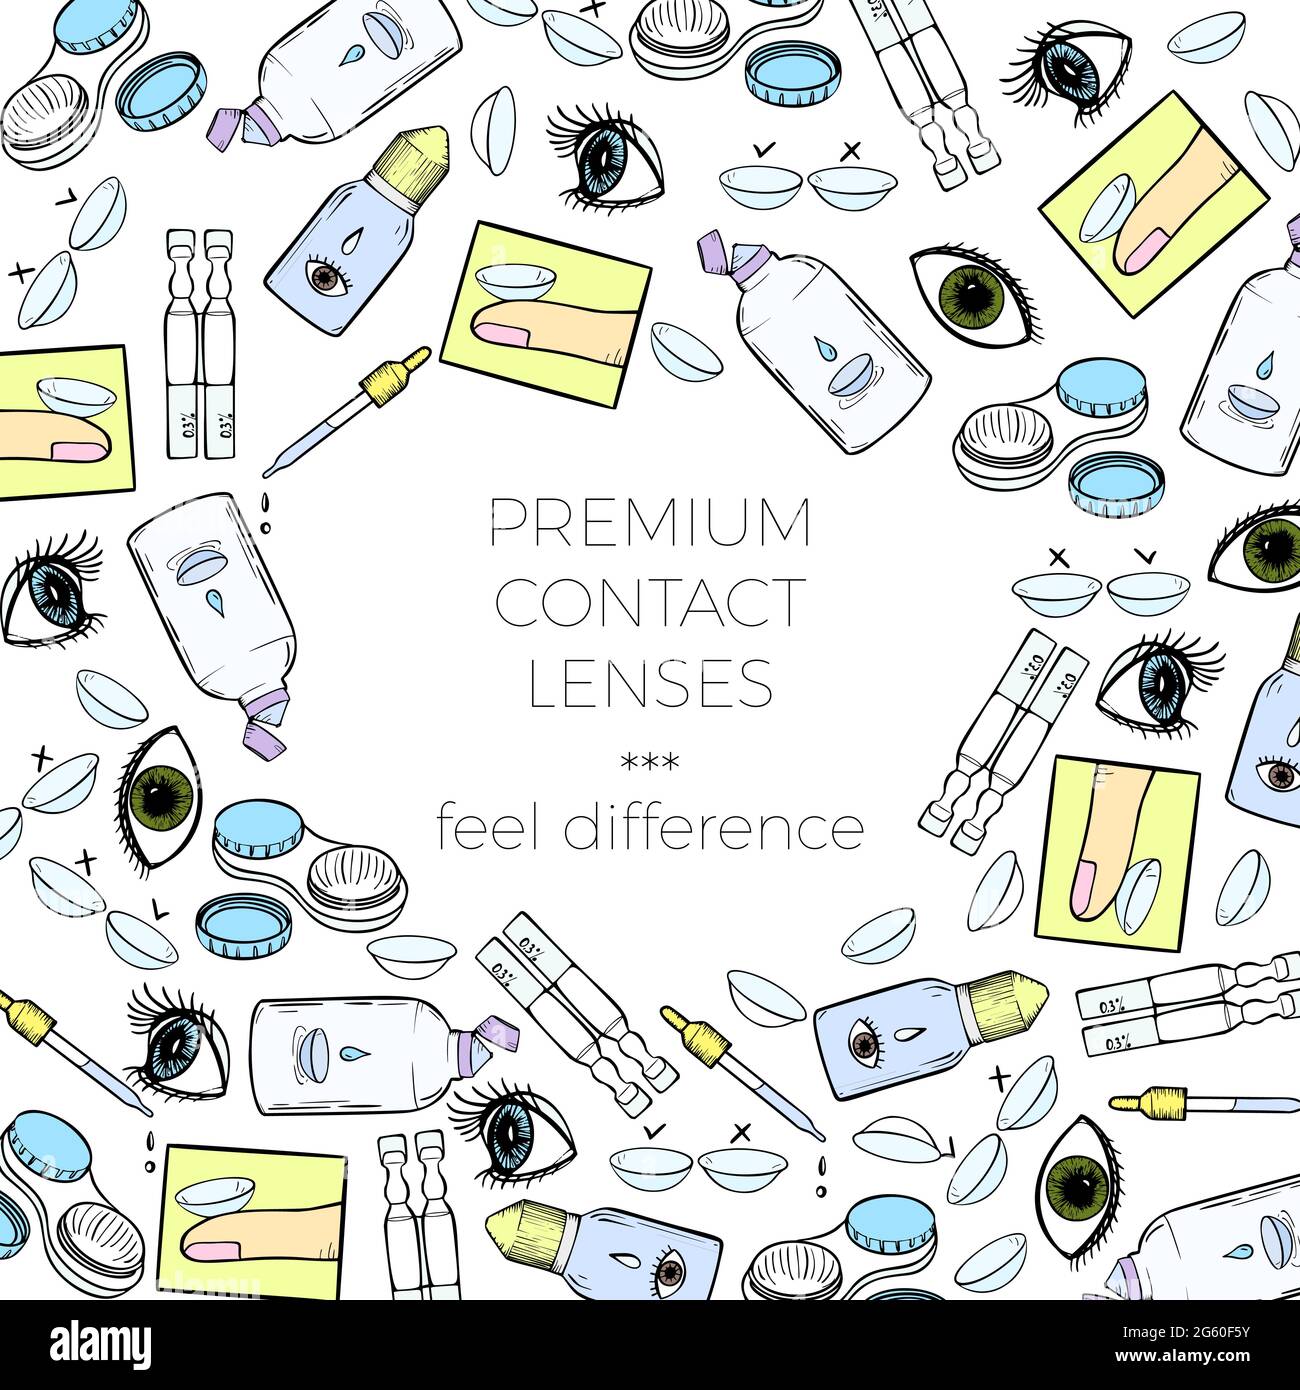 https://c8.alamy.com/comp/2G60F5Y/contact-lenses-banner-for-ophthalmology-clinic-or-lenses-shop-advertising-vector-design-template-with-cartoon-eyes-lenses-and-health-care-products-2G60F5Y.jpg